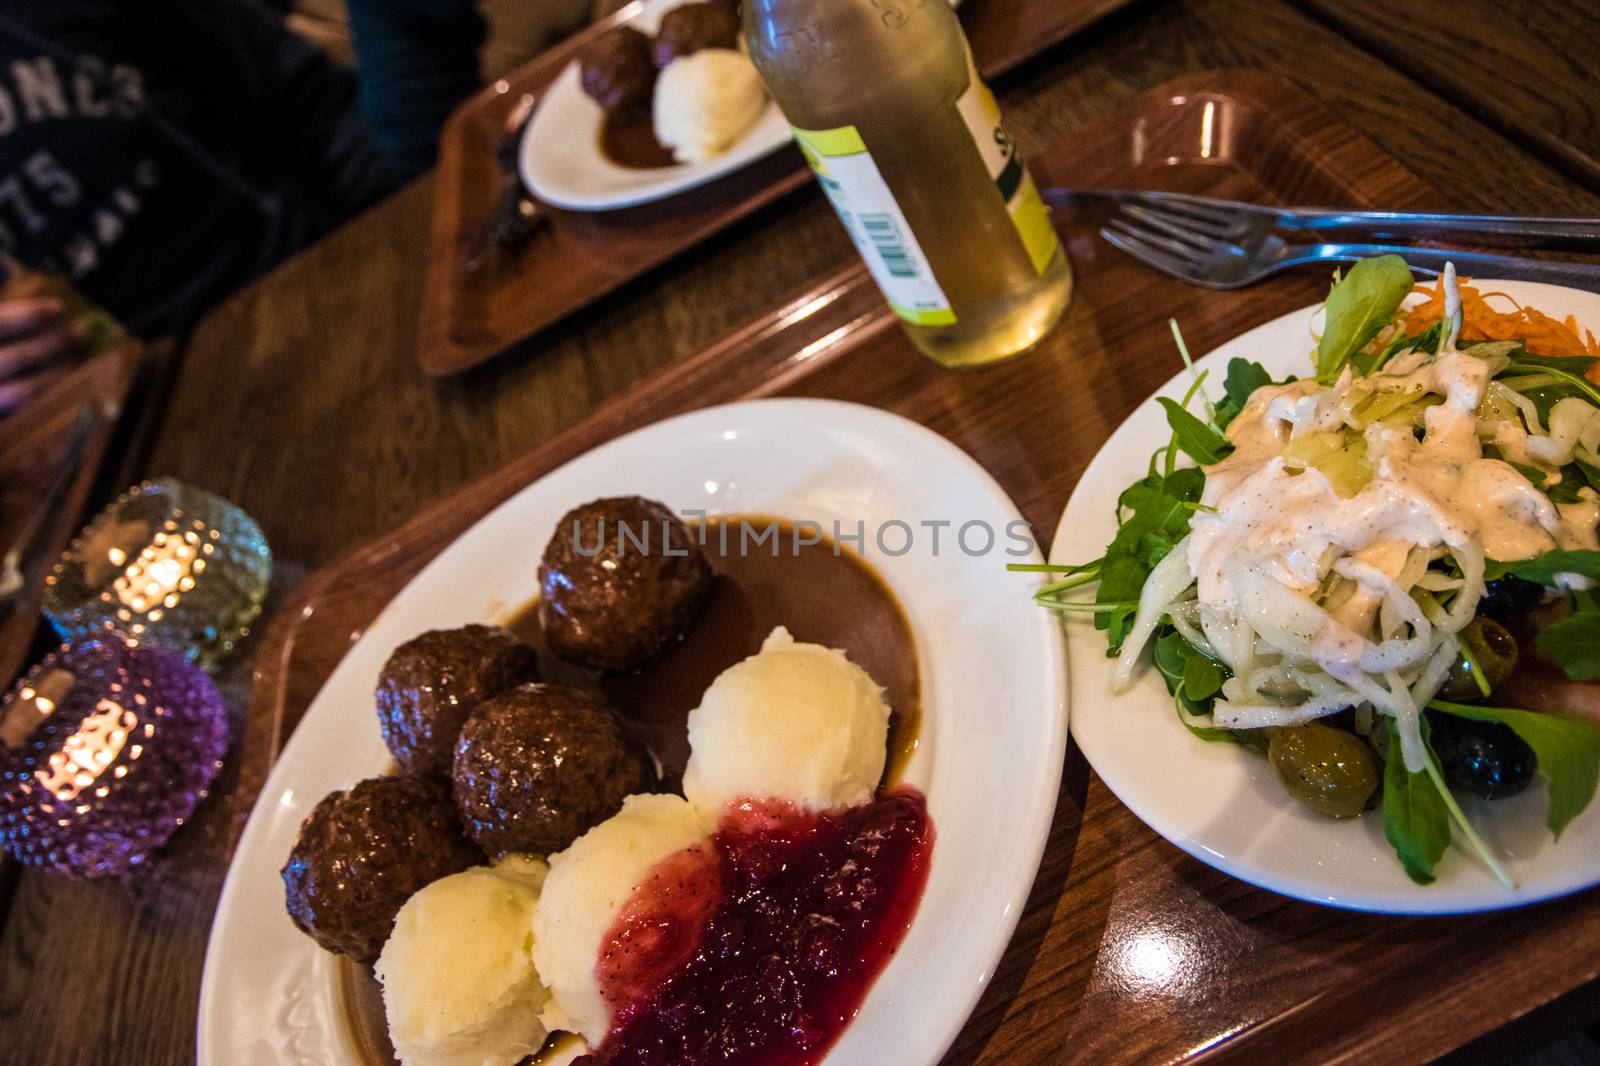 Swedish meatballs with salad, candles and lingonberries